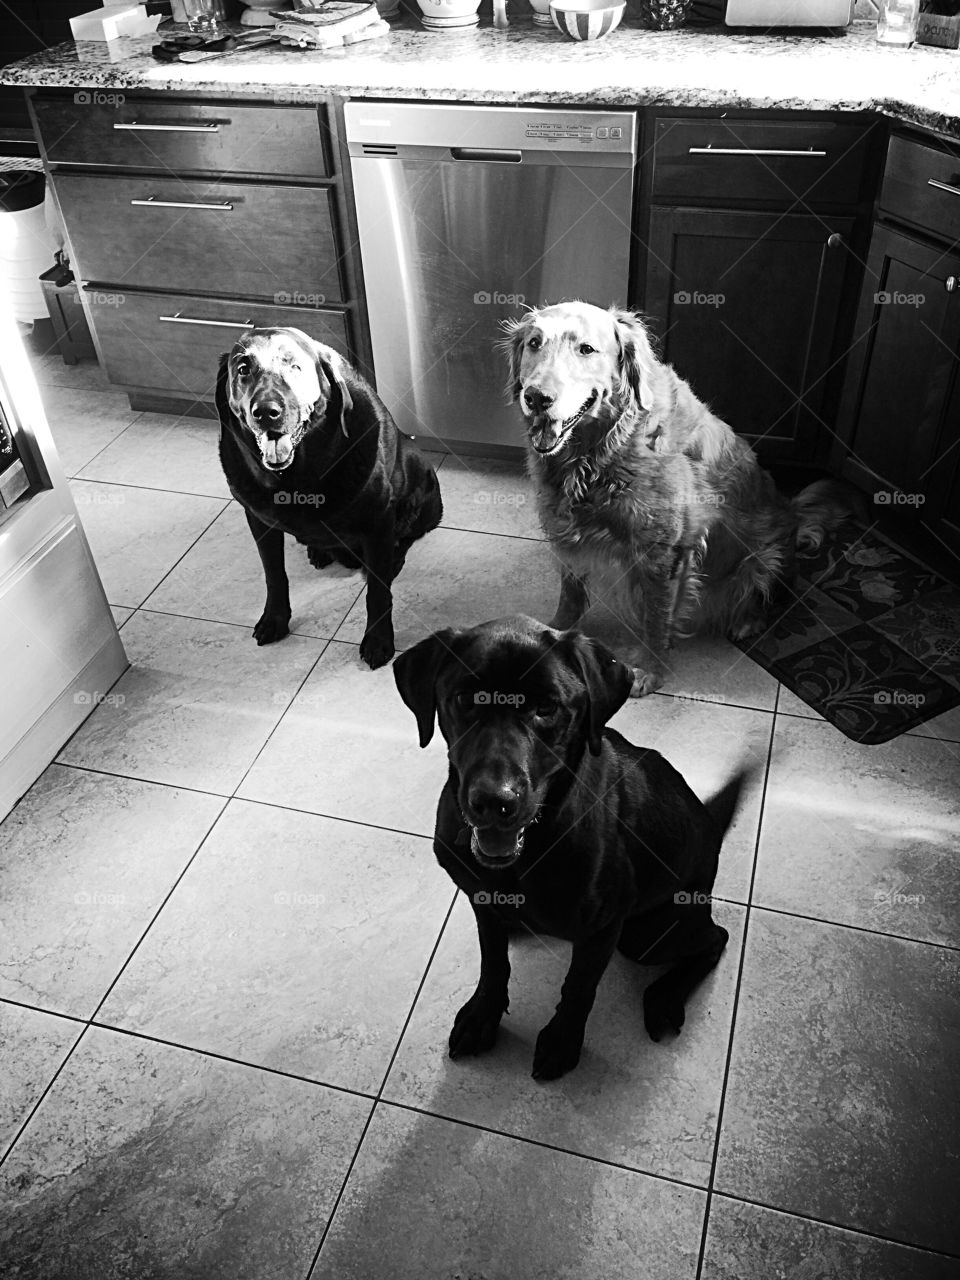 Breakfast Club. Our pups patiently waiting for breakfast in the morning!